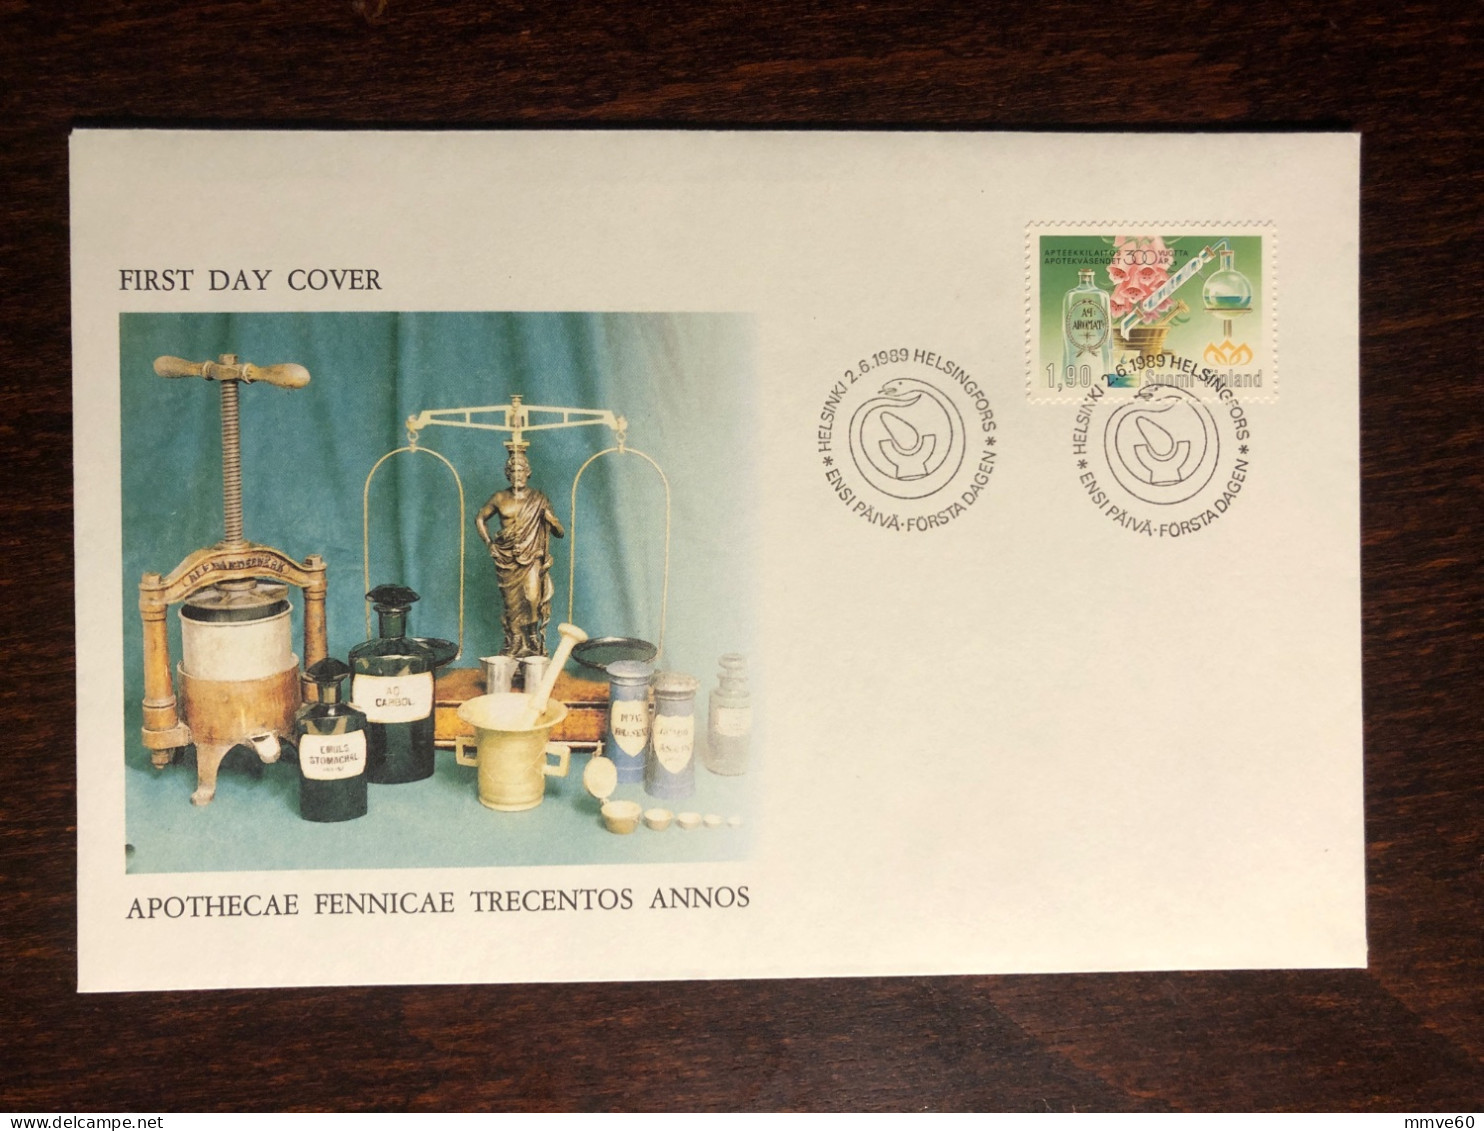 FINLAND FDC COVER 1989 YEAR PHARMACY PHARMACOLOGY HEALTH MEDICINE STAMPS - Briefe U. Dokumente